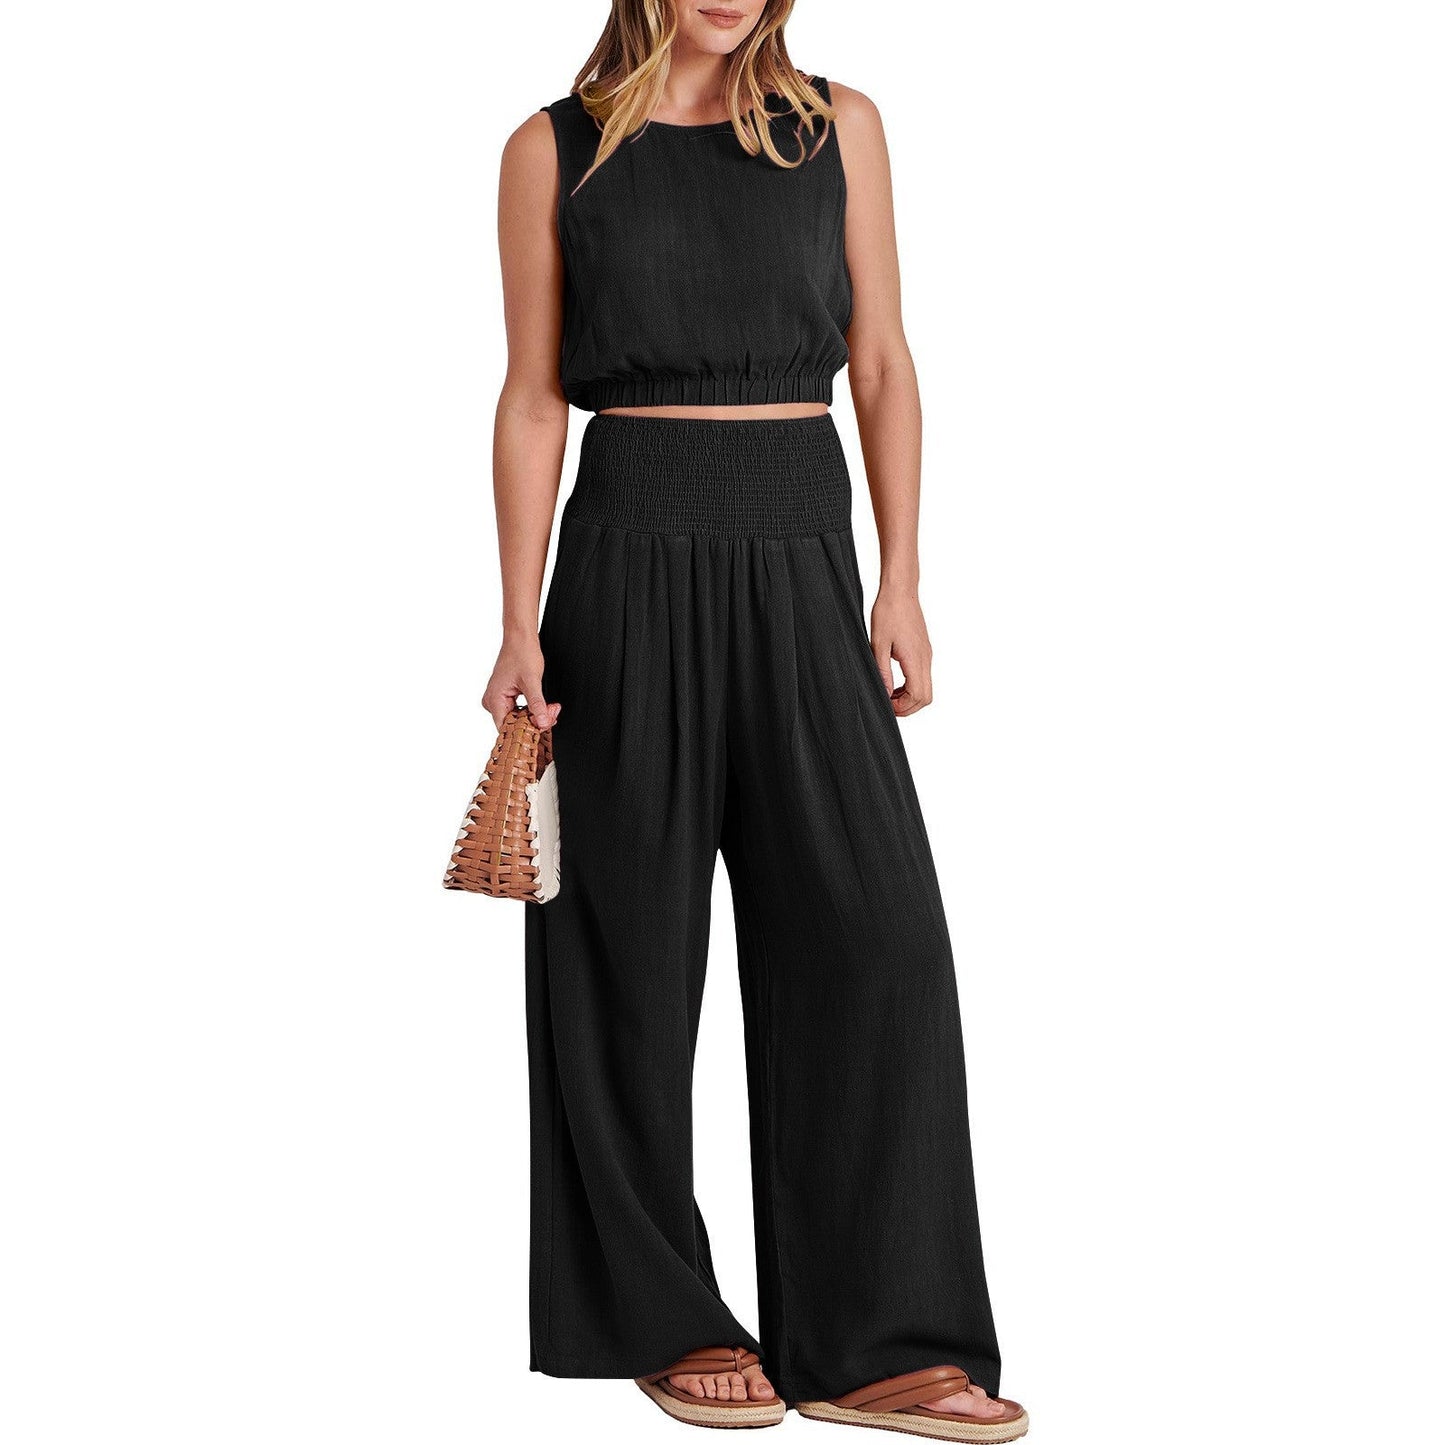 NTG Fad SUIT 898# Black / S Sleeveless Top and Pants Set